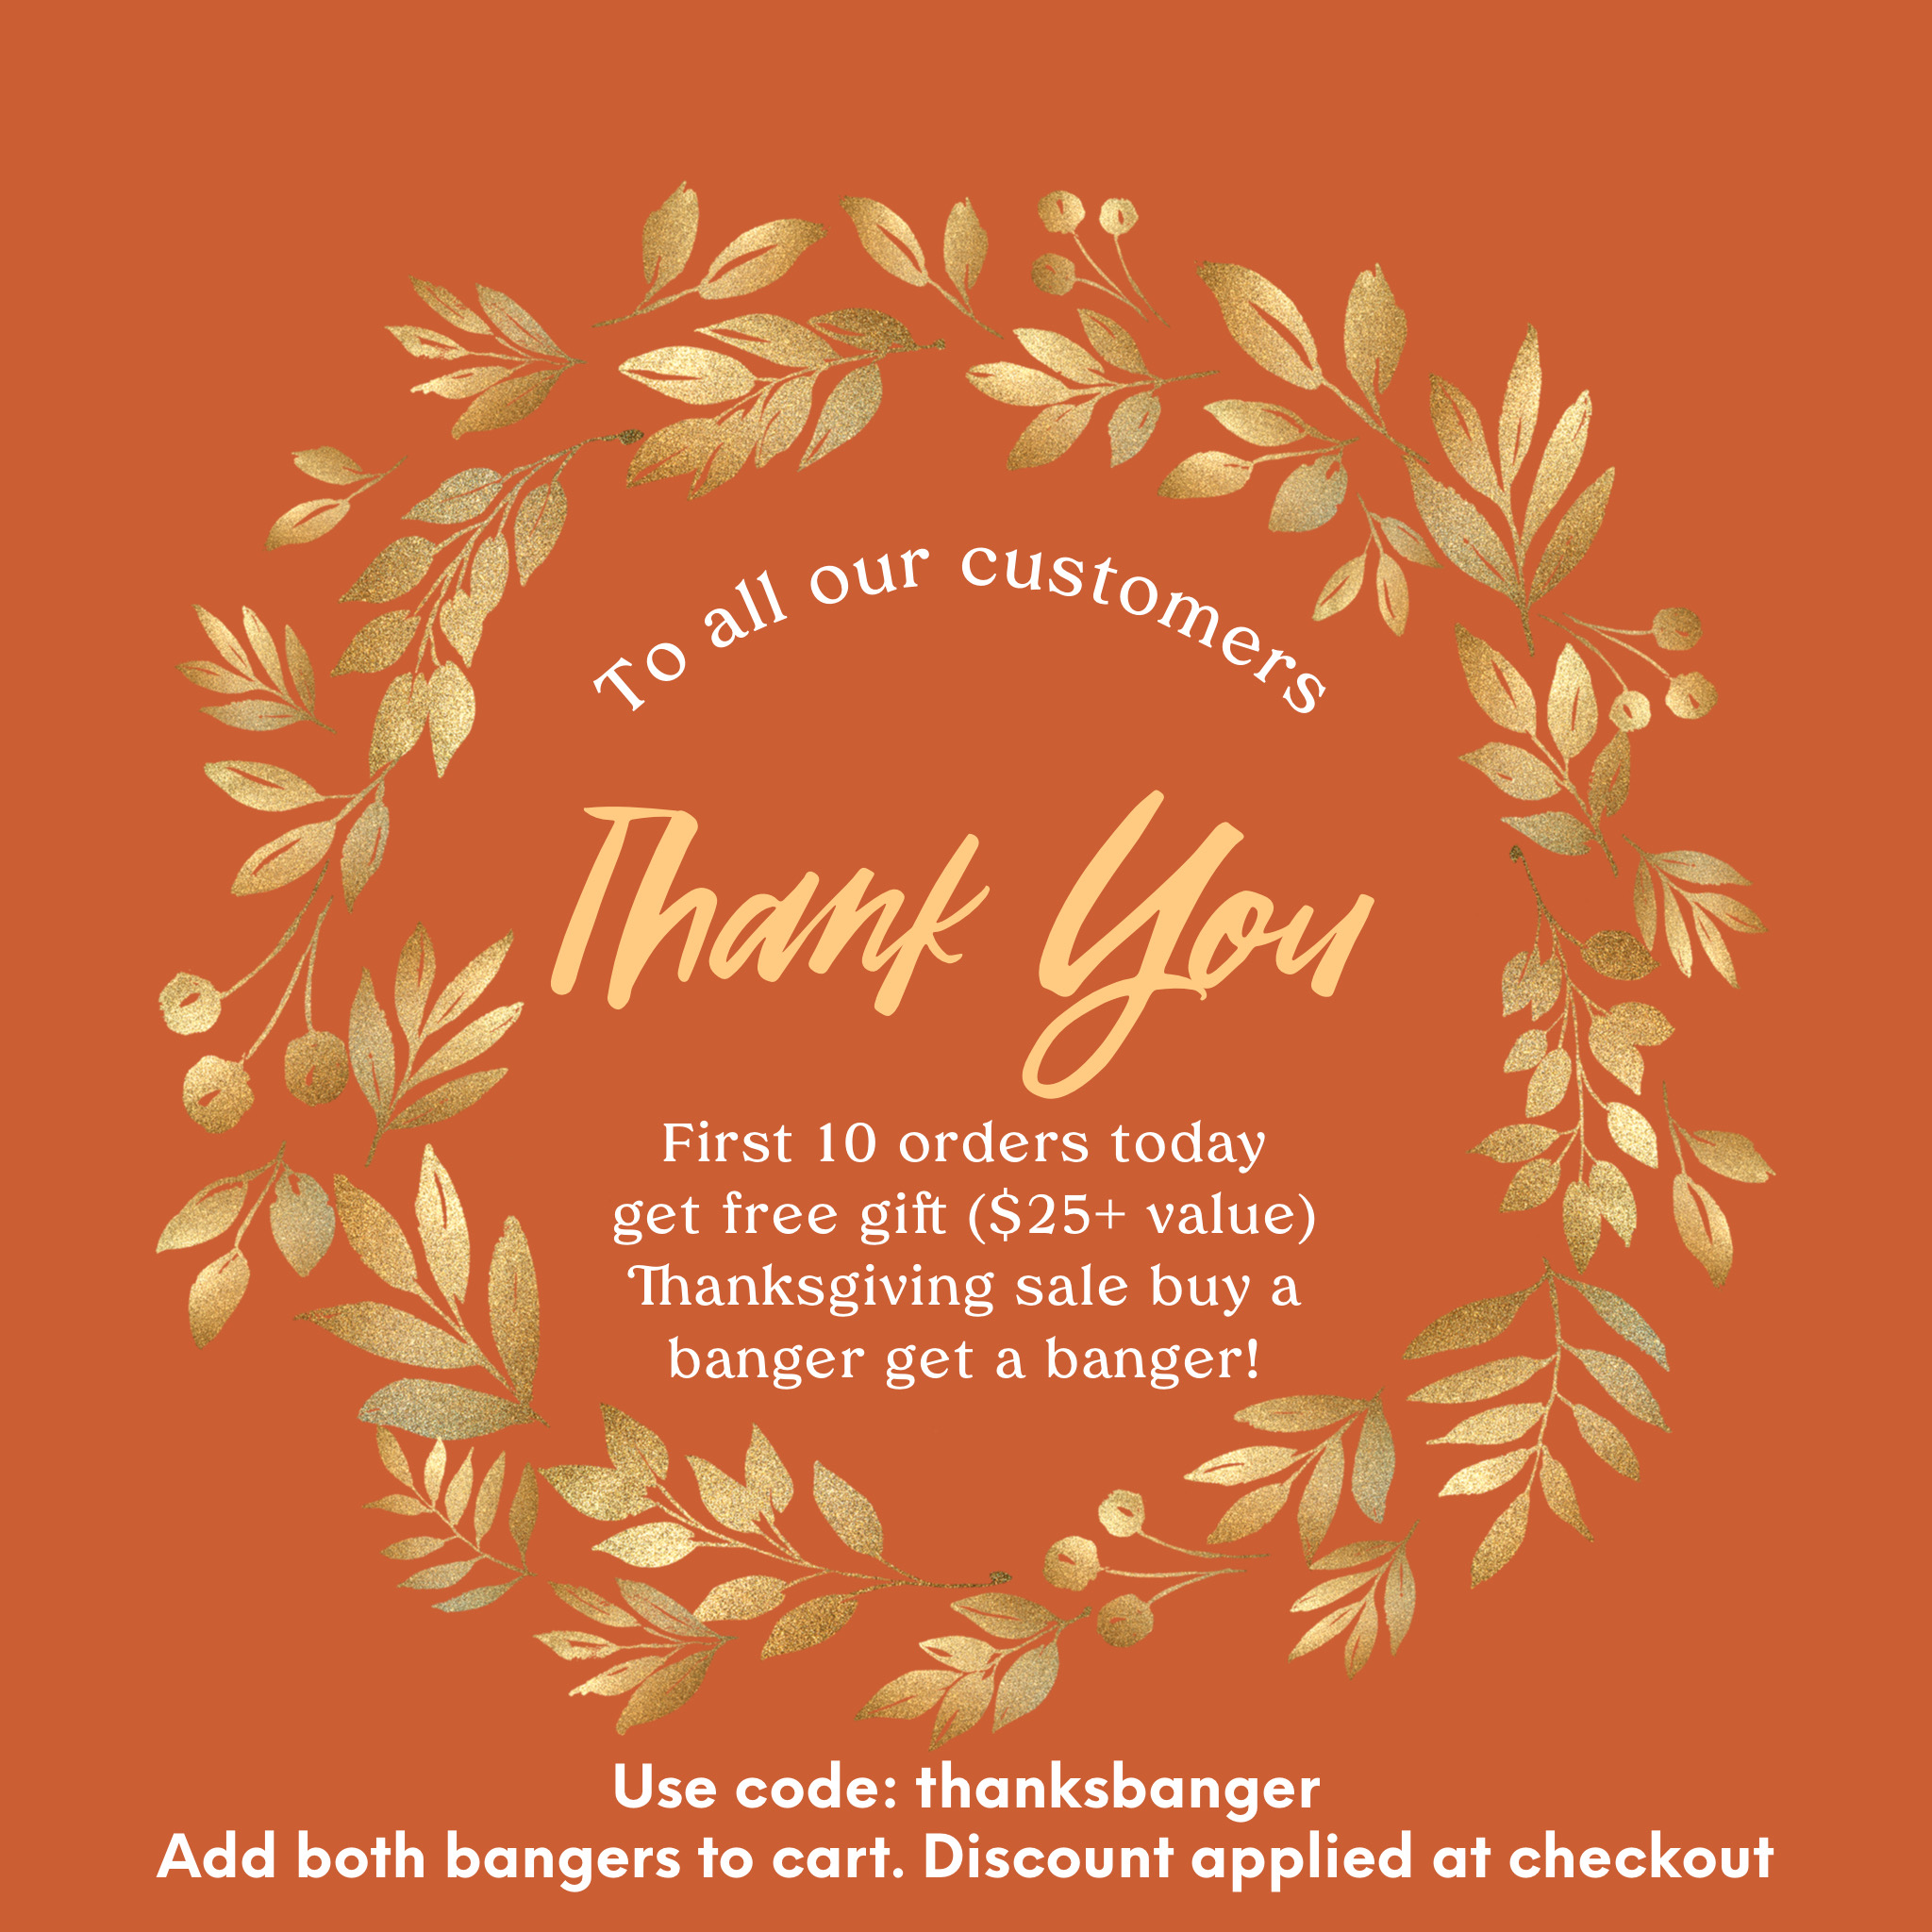  First 10 orders today get free gift 25 value Thanksgiving sale buy a banger get a banger! 0TI Seof Use code: inhanksbanger Add both bangers to cart. Discount applied at checkout 